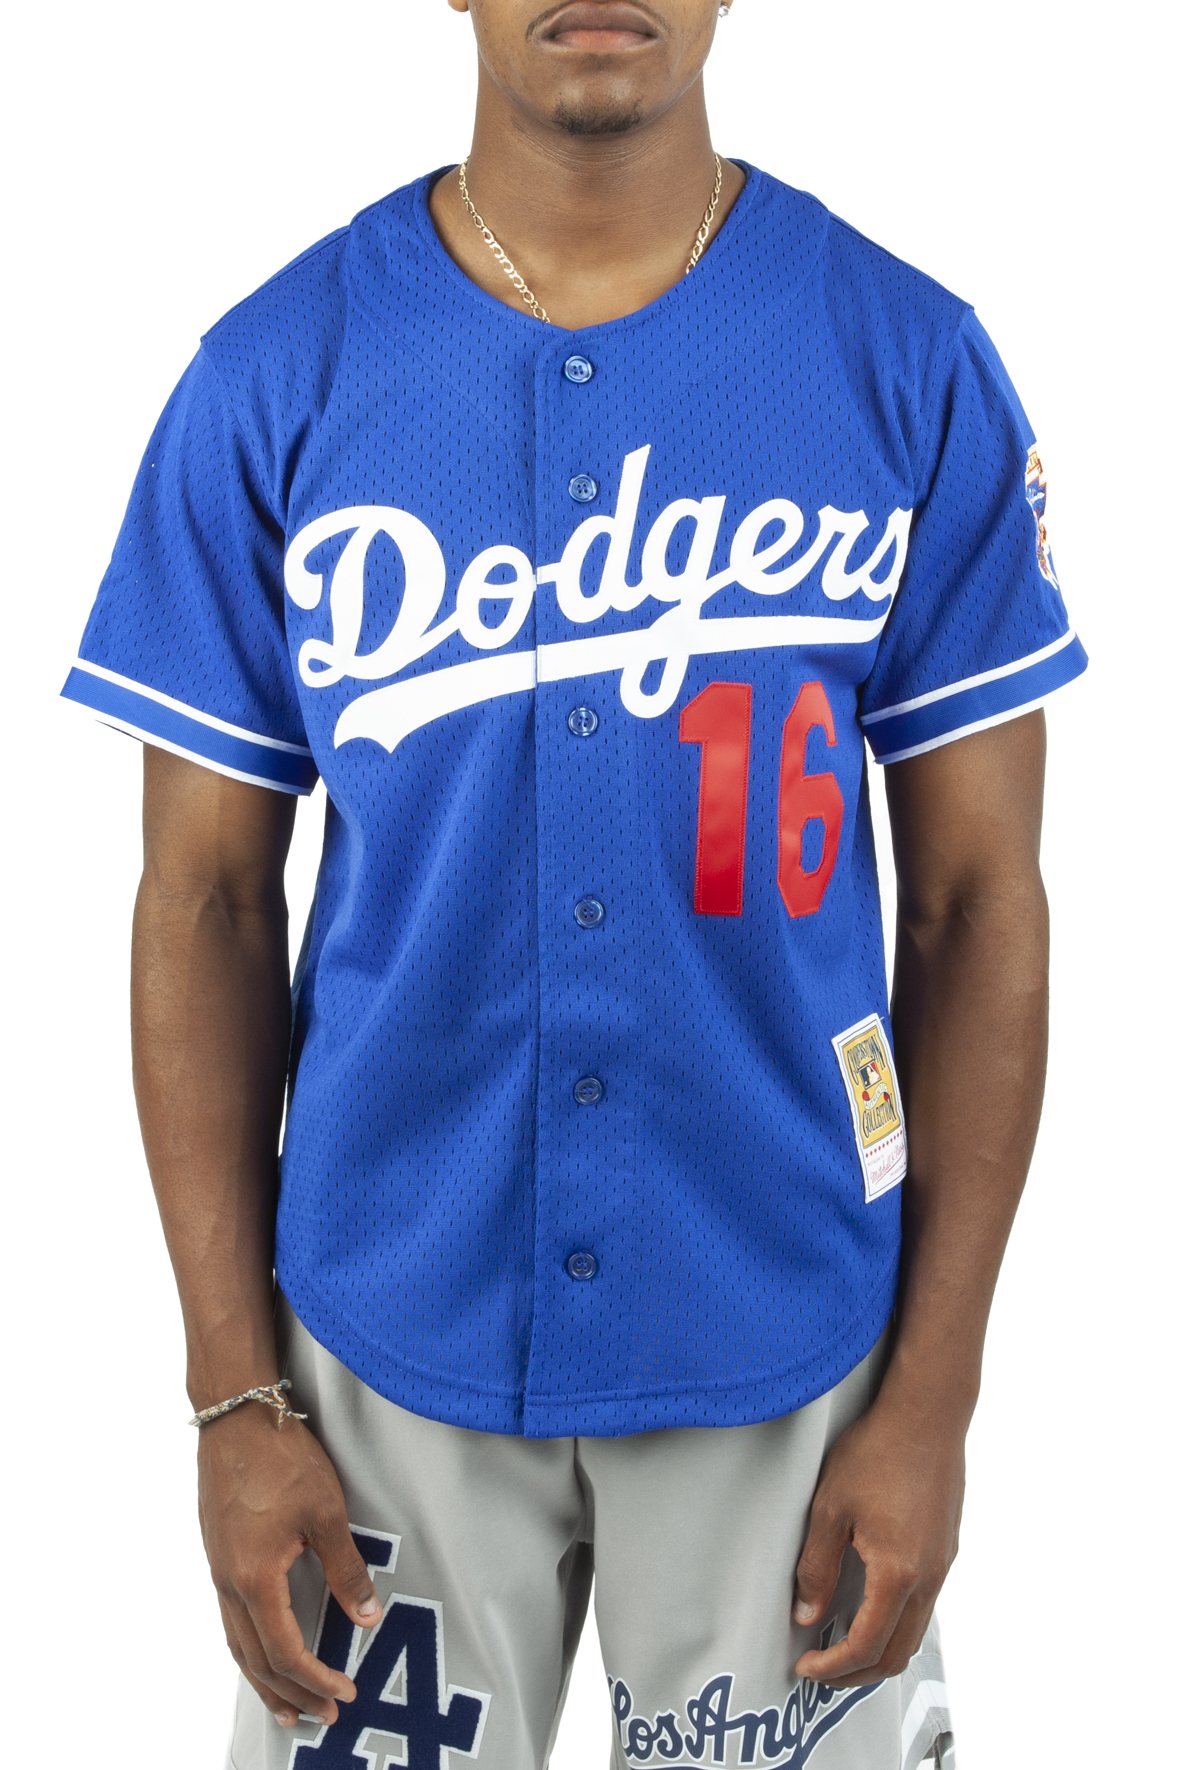 MITCHELL AND NESS Hideo Nomo Los Angeles Dodgers 1997 Authentic Jersey  ABBF3359-LAD97HNOROYA - Shiekh